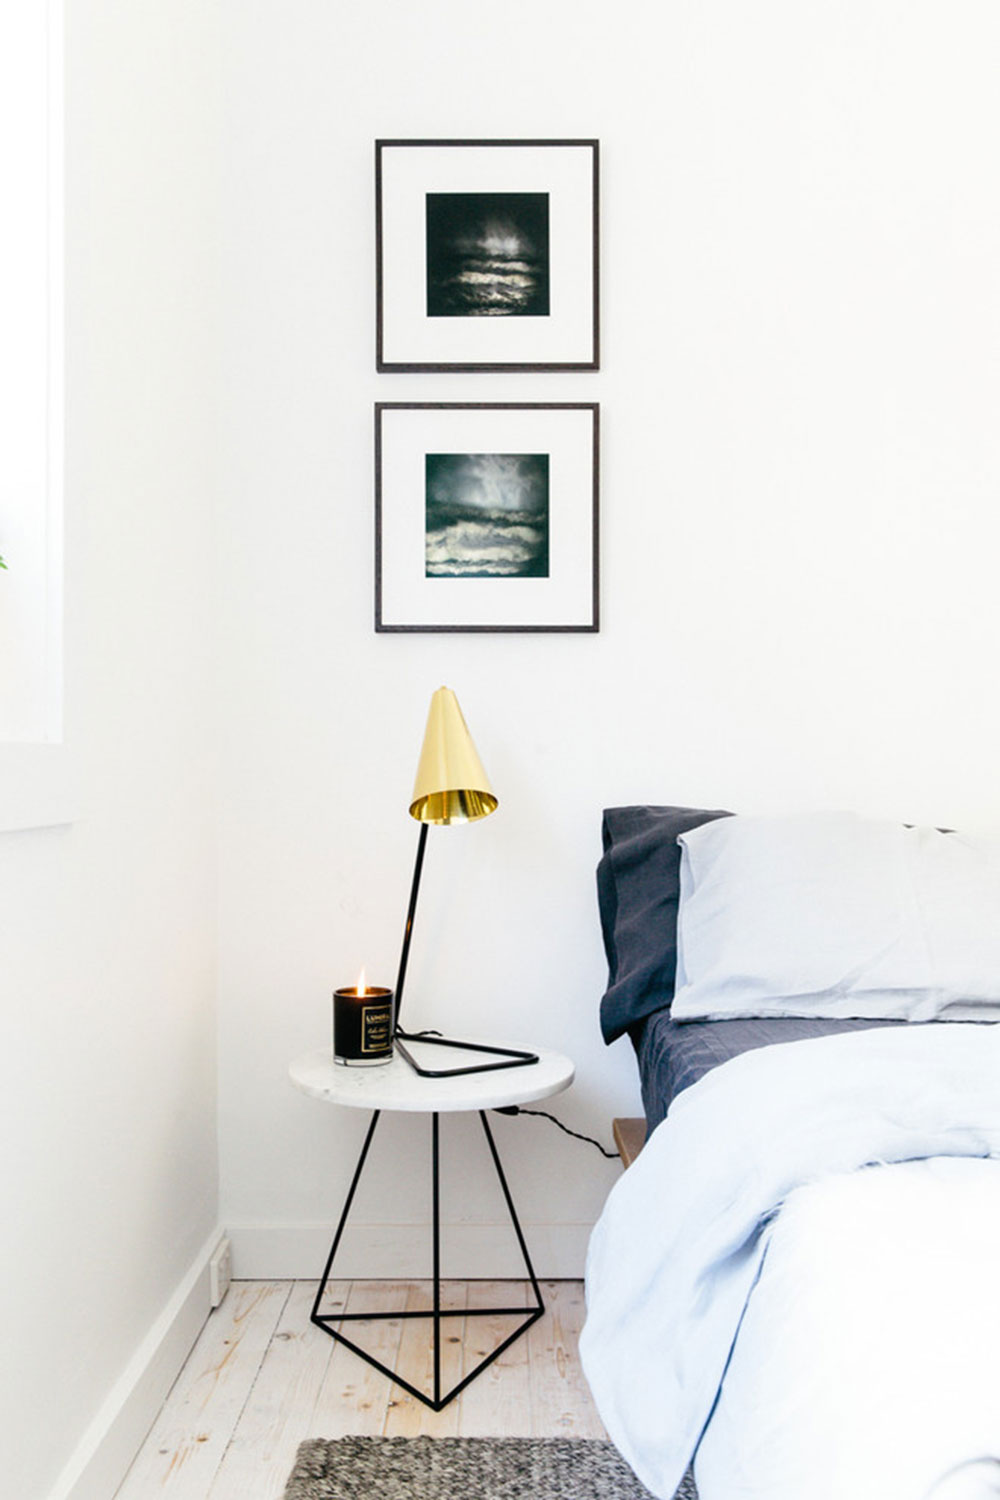 Cross-St-by-Caroline-McCredie Cool bedside table ideas to try in your bedroom